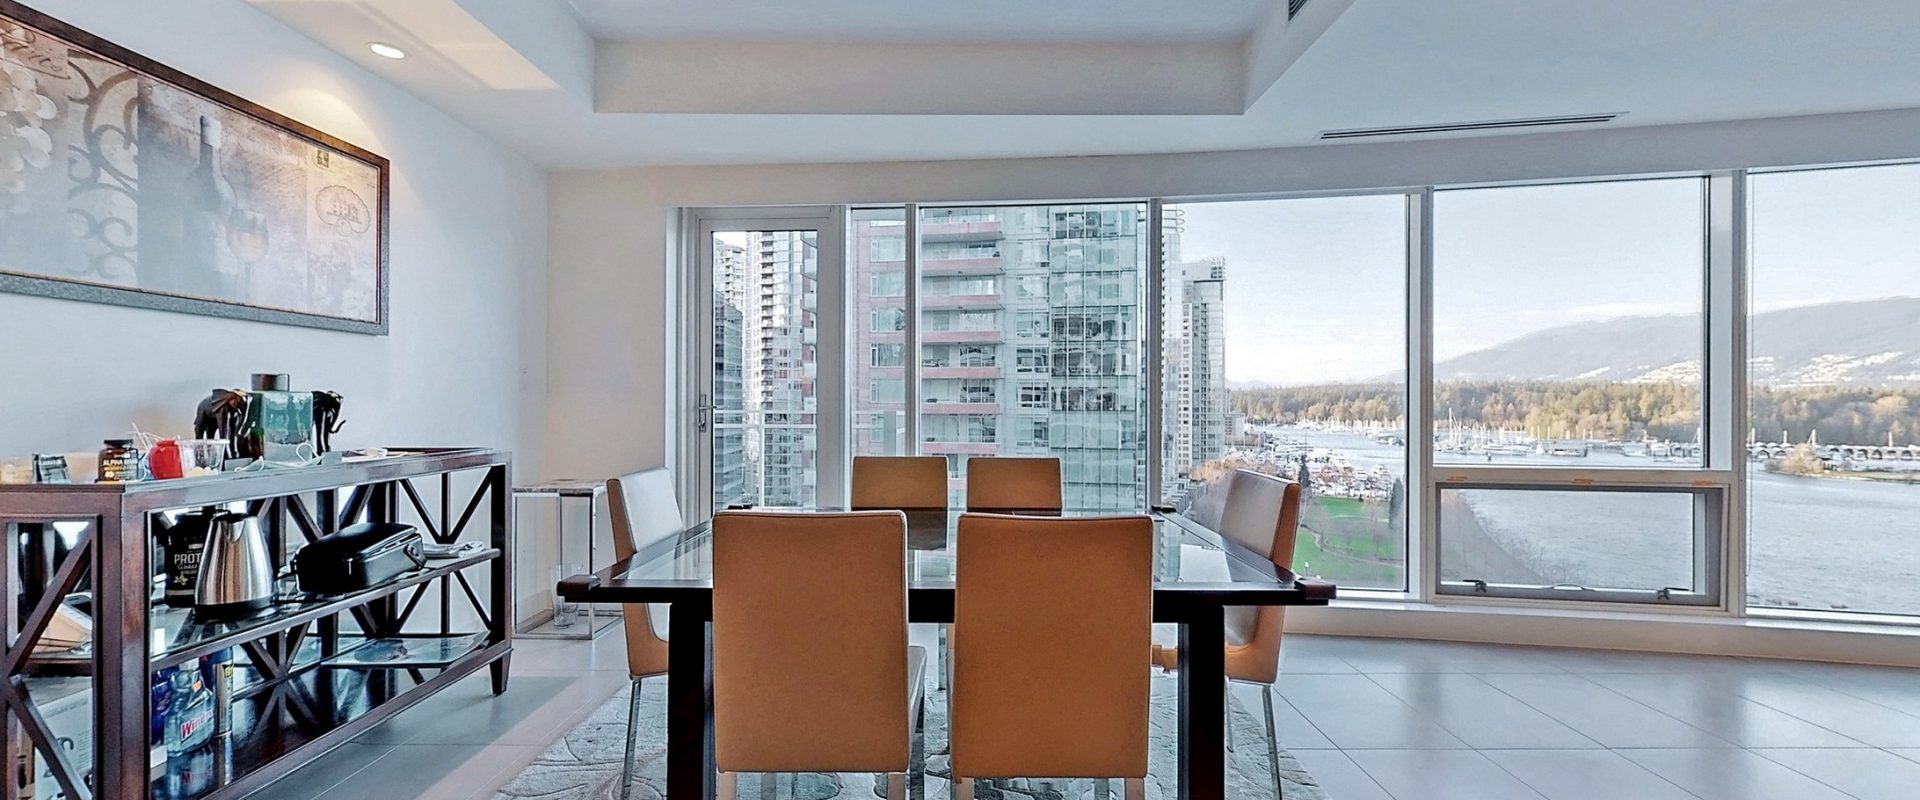 【Coal Harbour】Harbour Green 2667sqft Apartment with amazing sea view